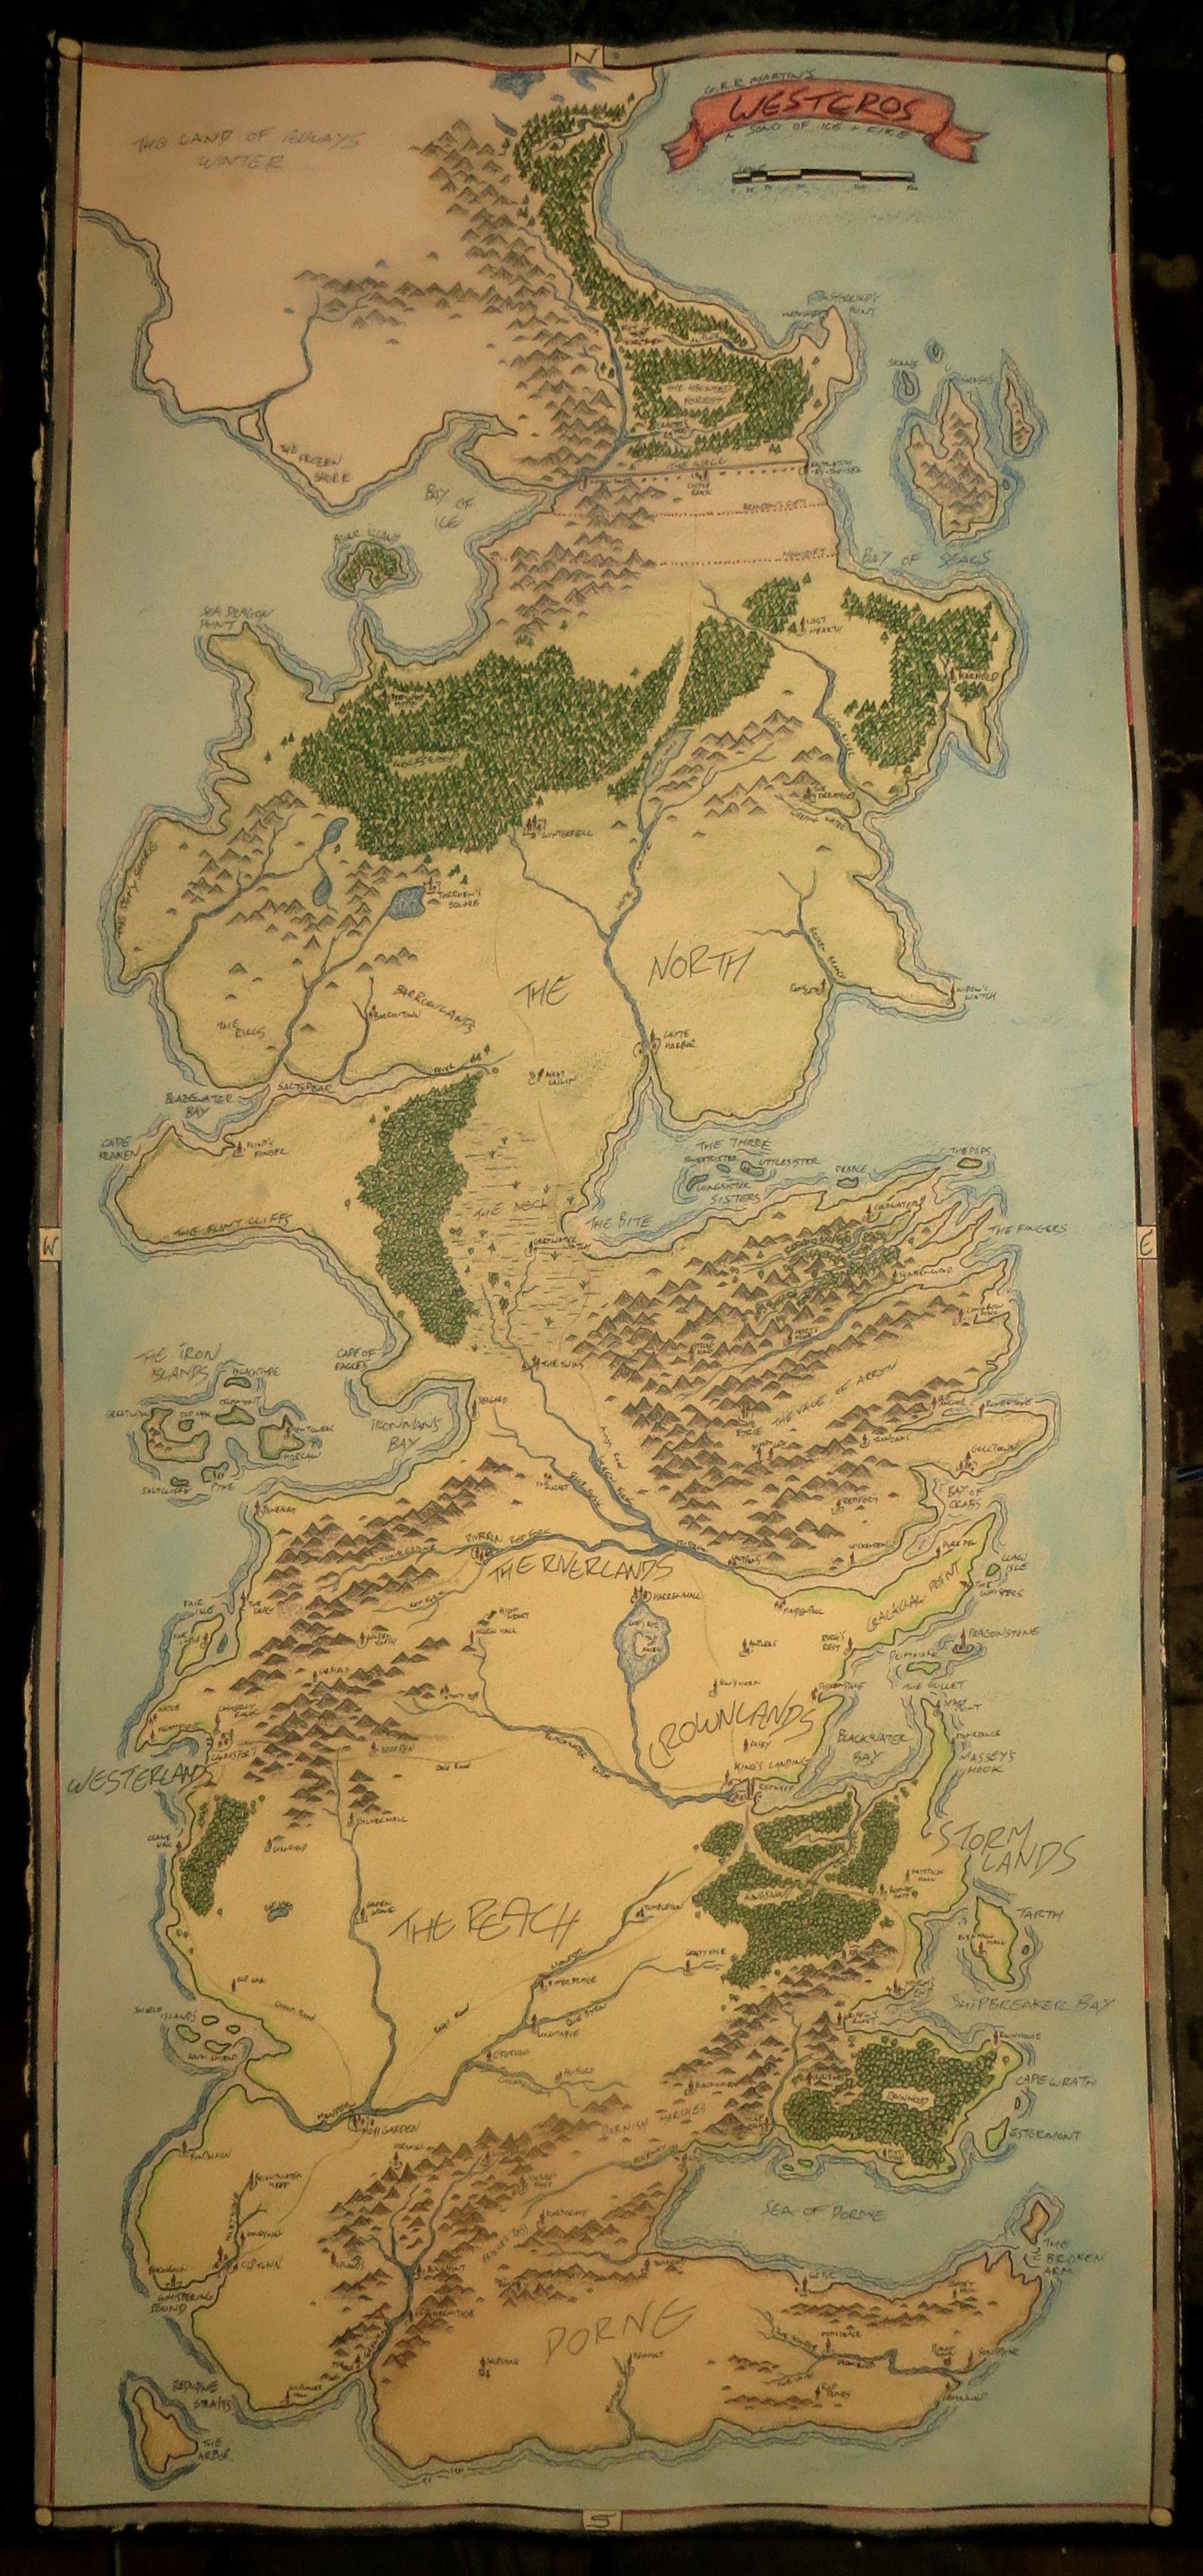 I drew a map of Westeros from Game of Thrones …